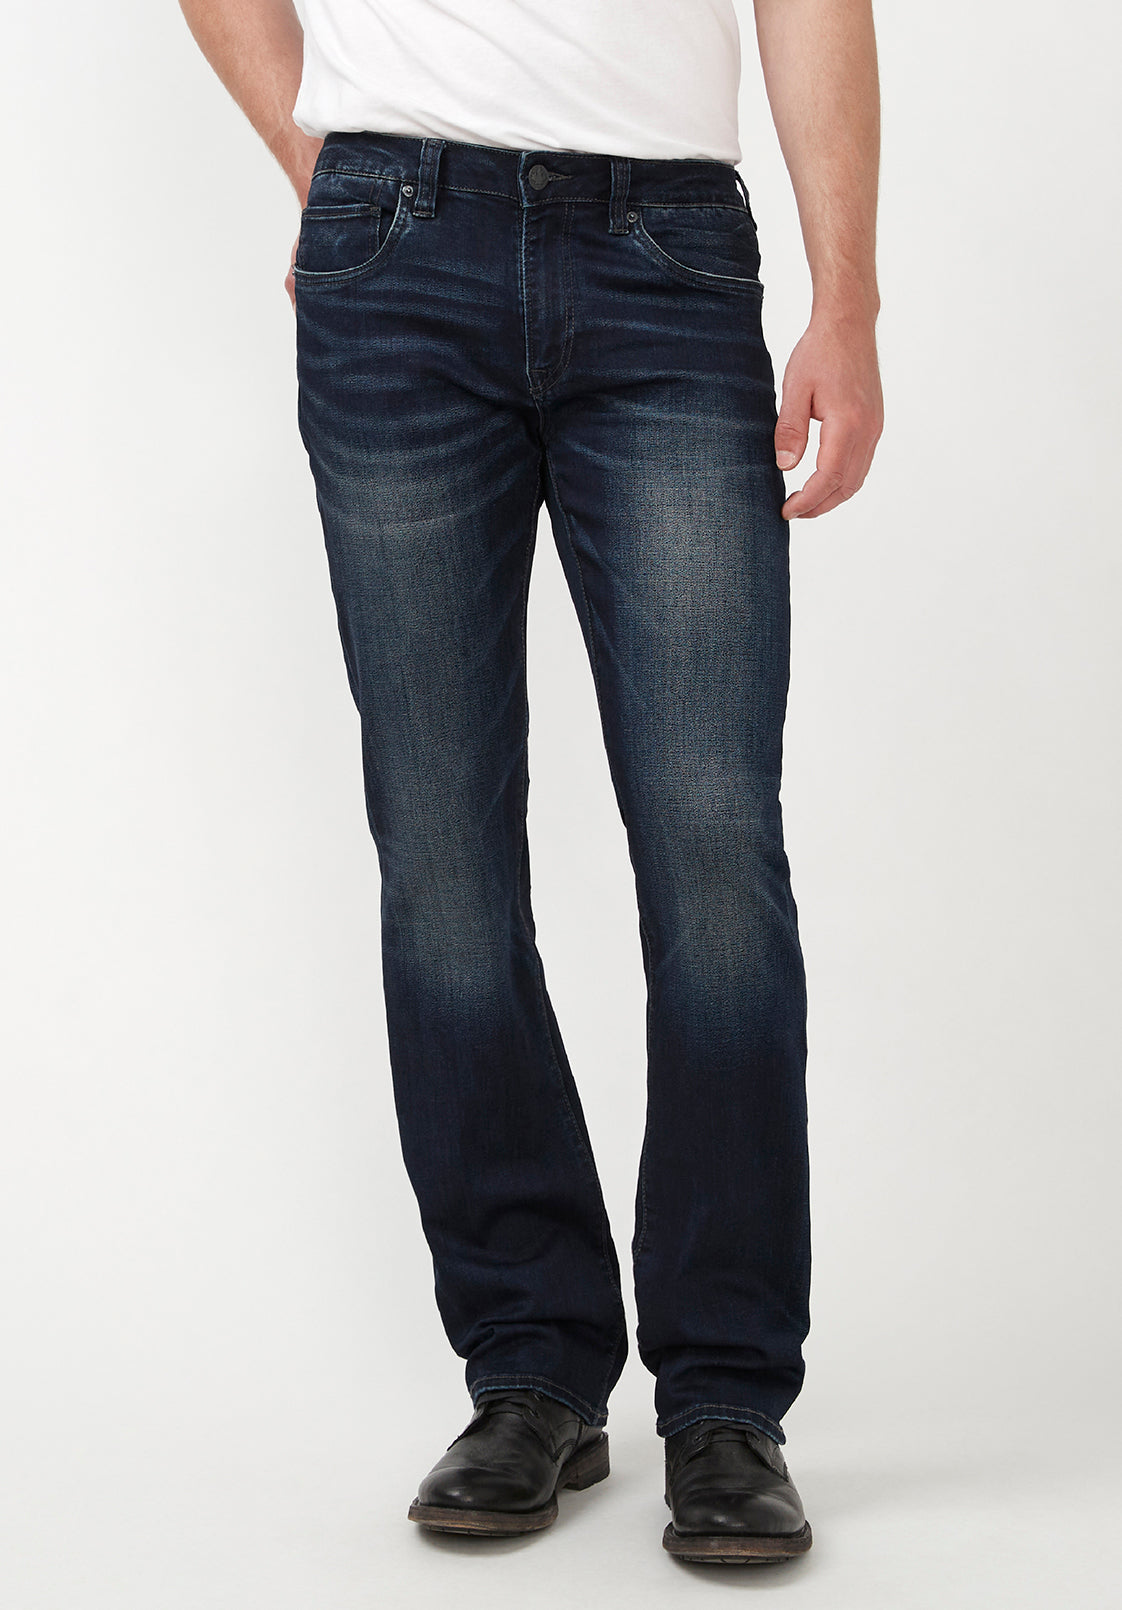 Slim Bootcut King Men's Jeans in Whiskered and Sanded Dark Blue ...